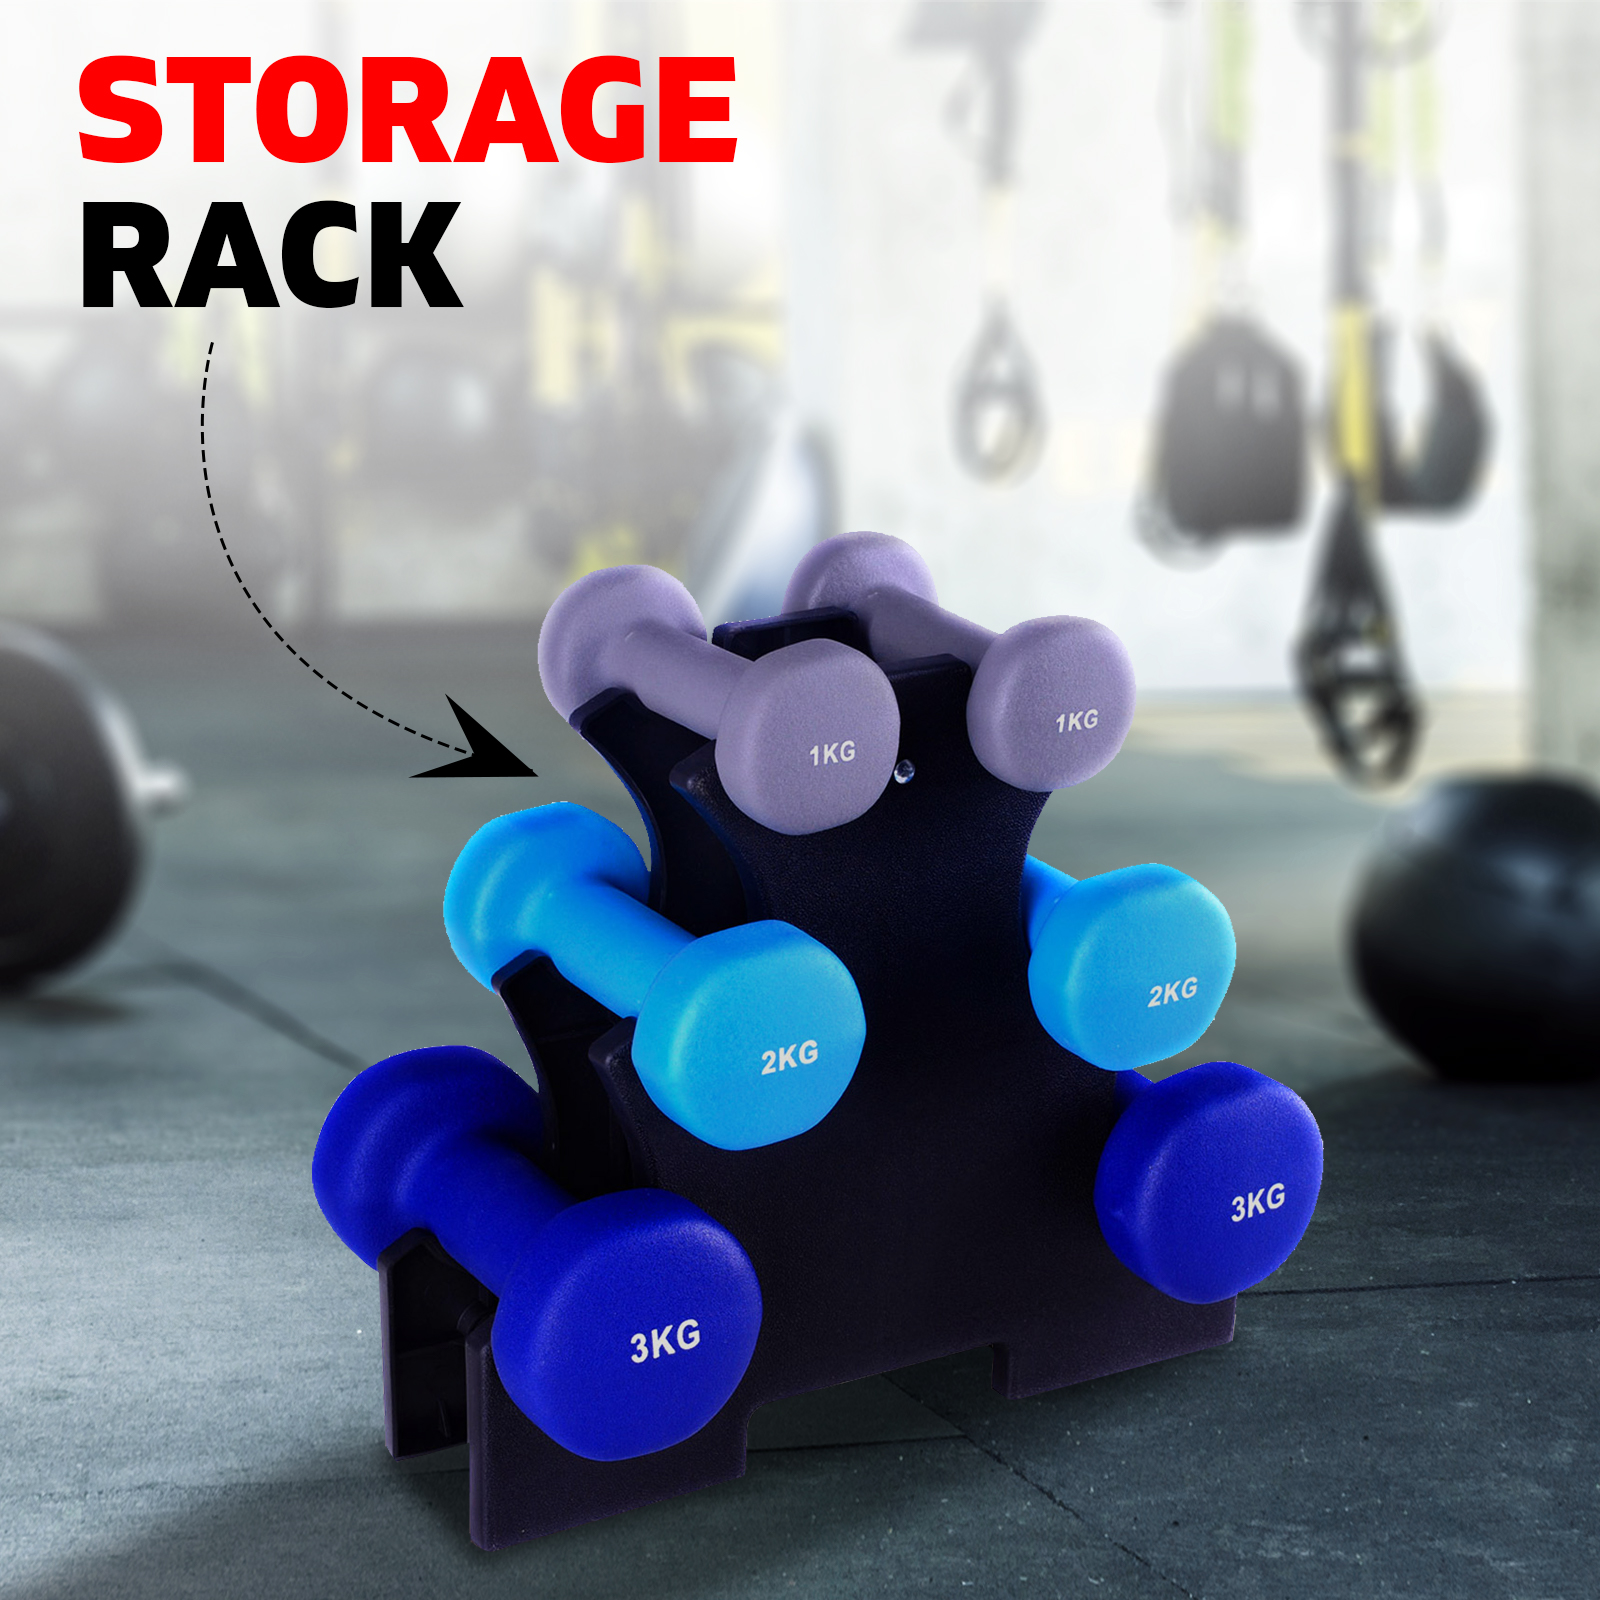 6 Piece Fitness Dumbbell Workout Weights Set 12kg with Stand Exercise Home Gym